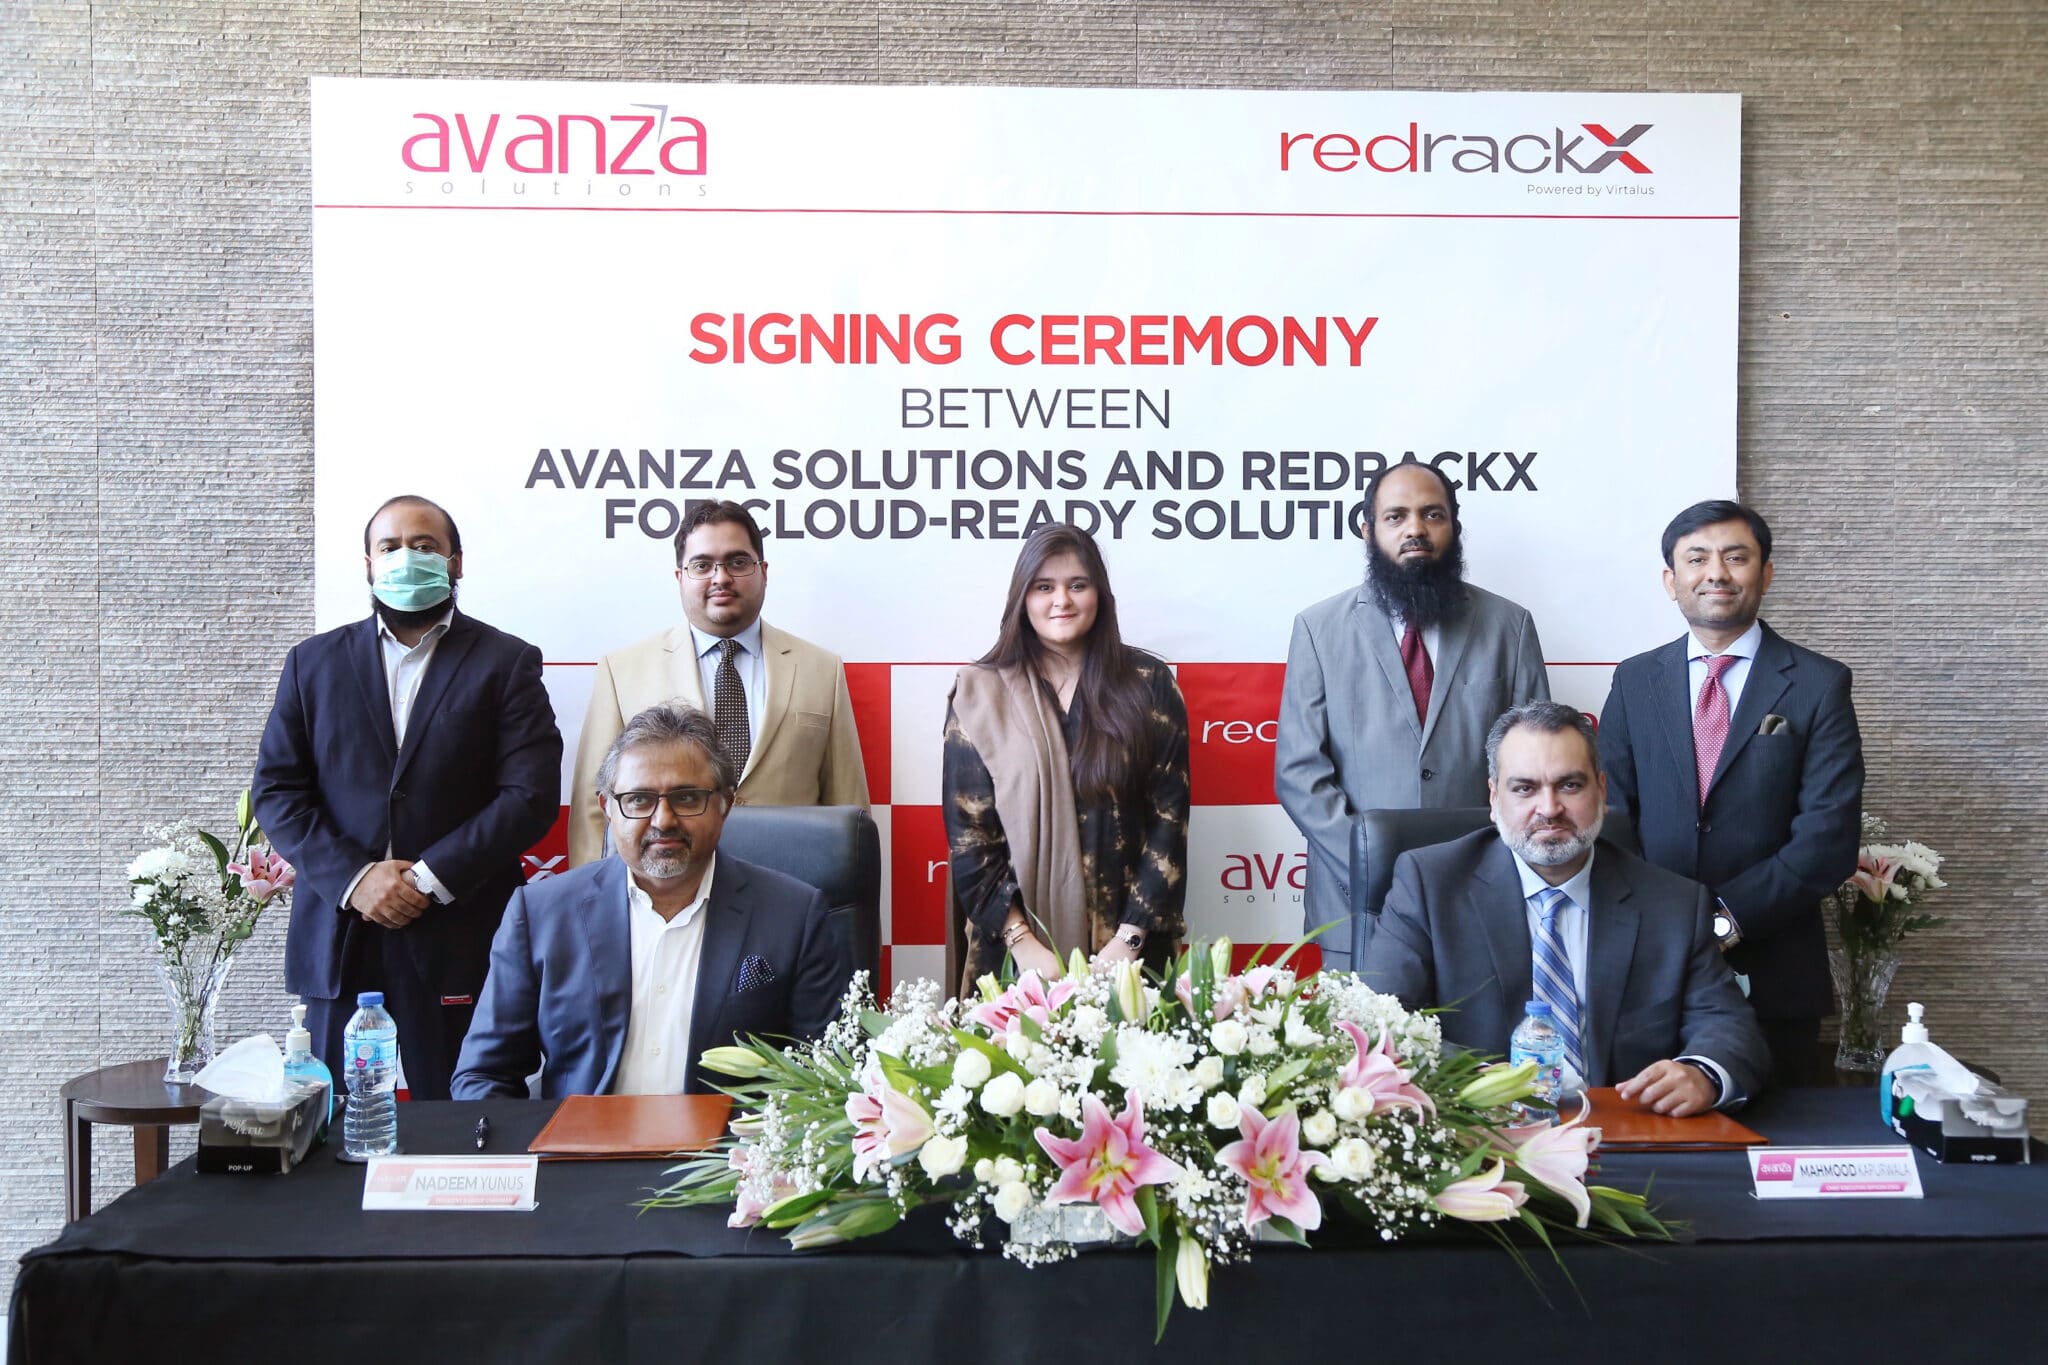 Redrackx and Avanza Solutions Become Partners for Cloud-Ready Solutions for Businesses